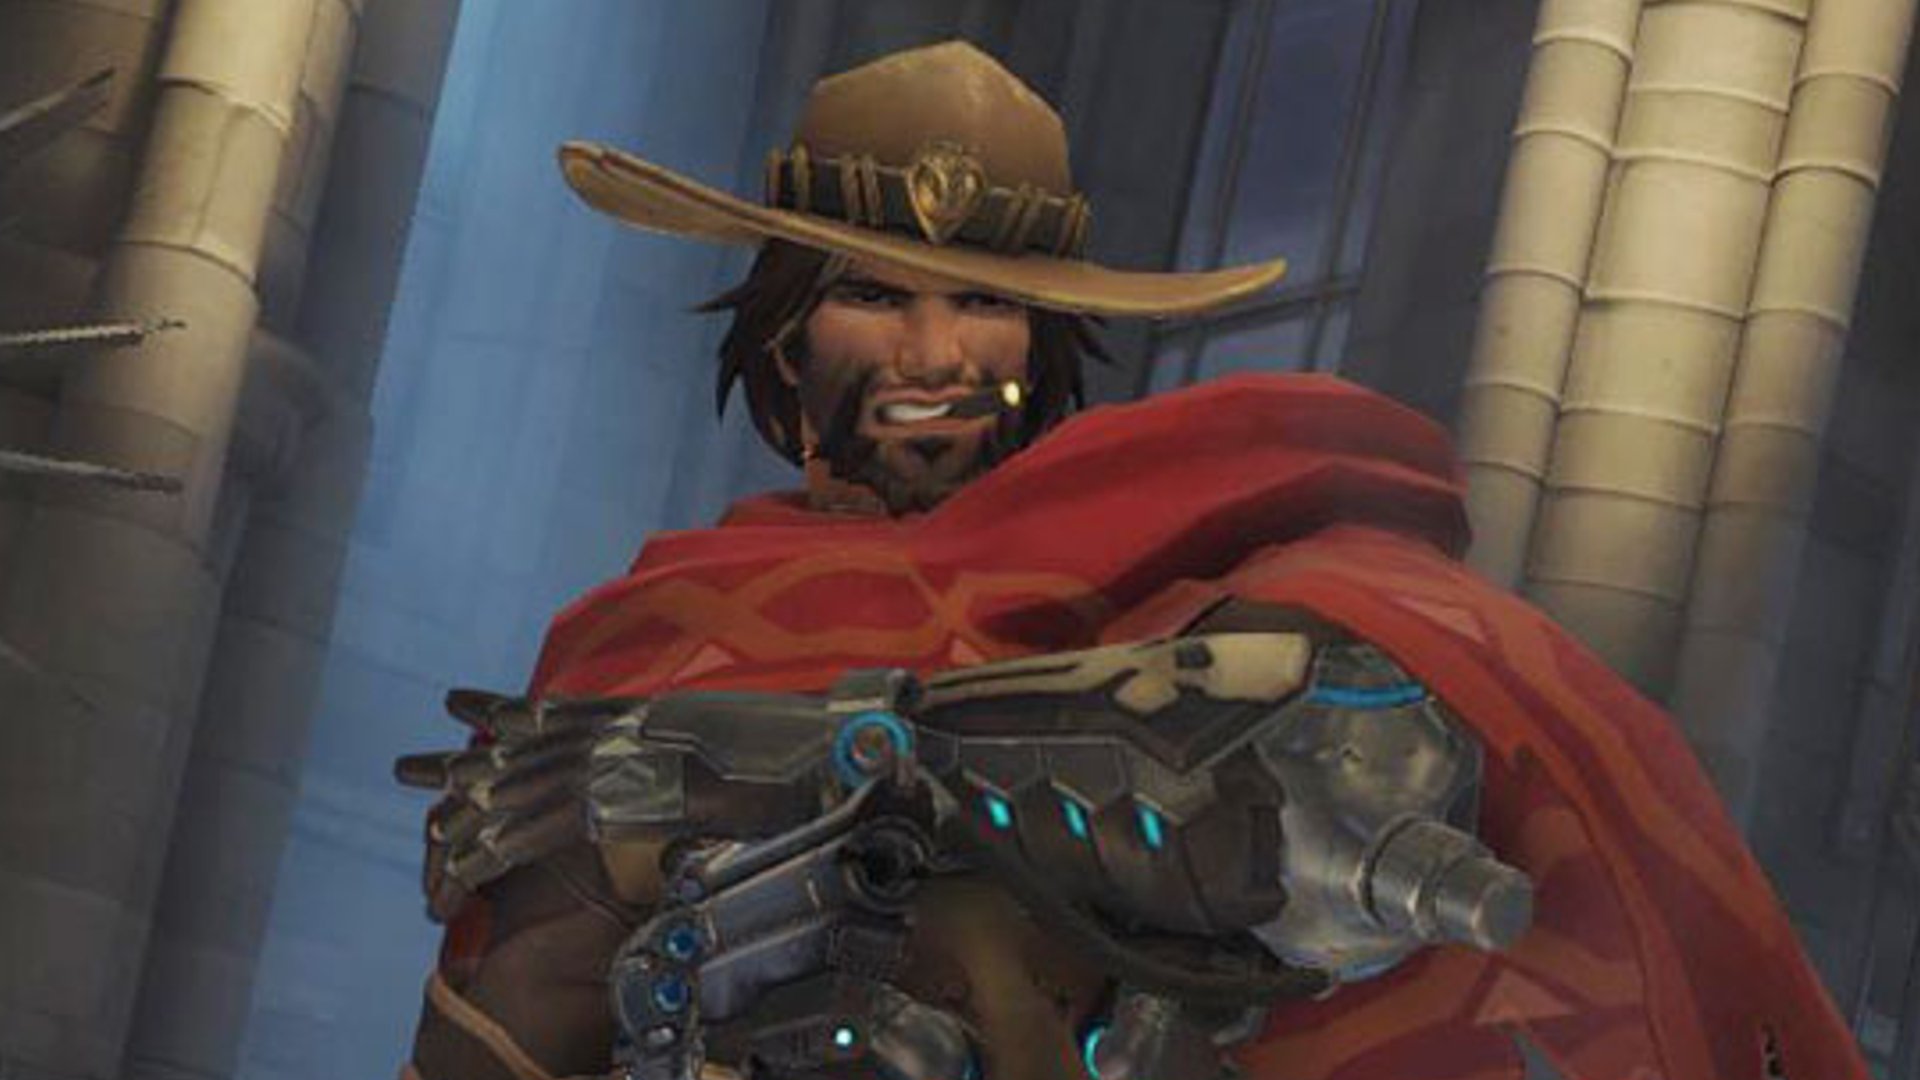 McCree can be seen shooting his pistol.